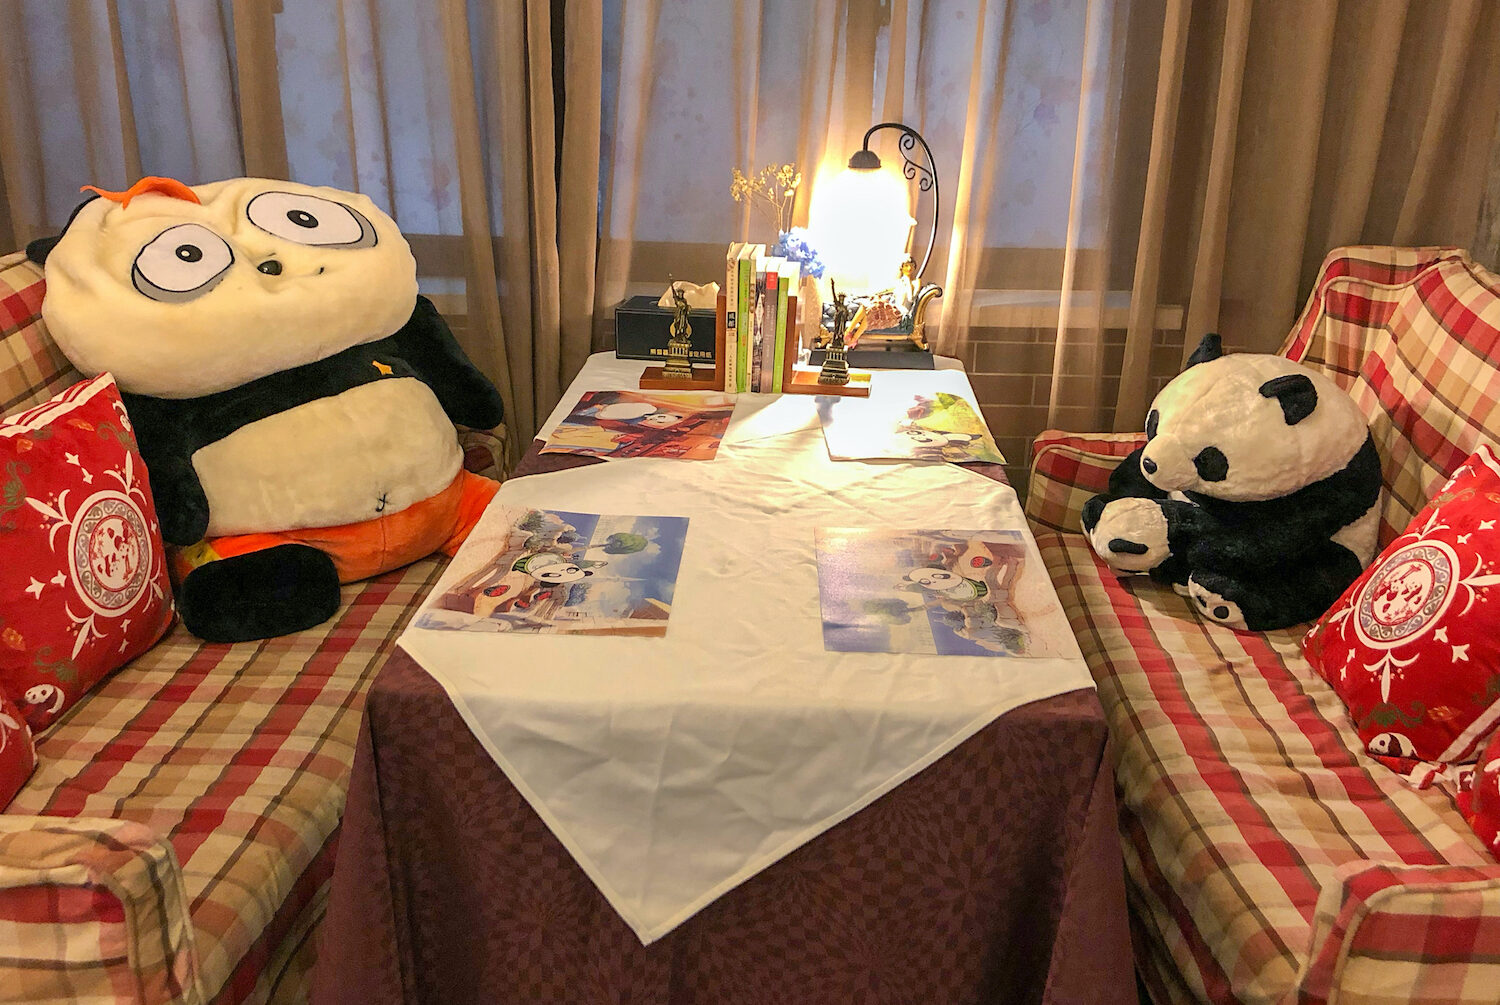 Panda Cafe in Chengdu with a table and two stuffed animal pandas sitting on the benches